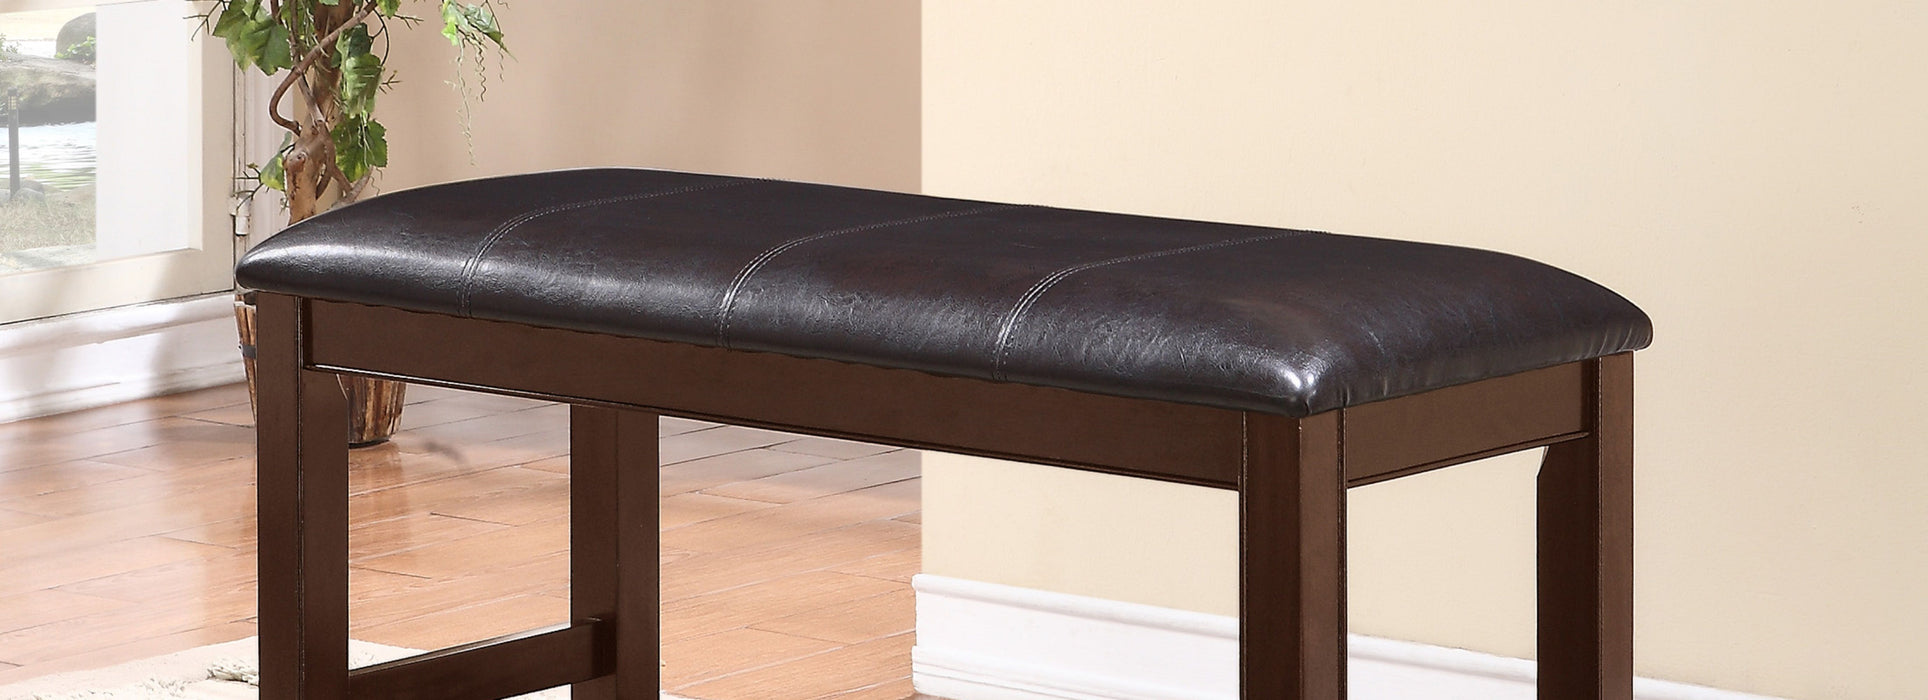 Farmhouse Style 1 Piece Brown Espresso Counter Height Bench Footrest Faux Leather Upholstered Seat Wooden Furniture